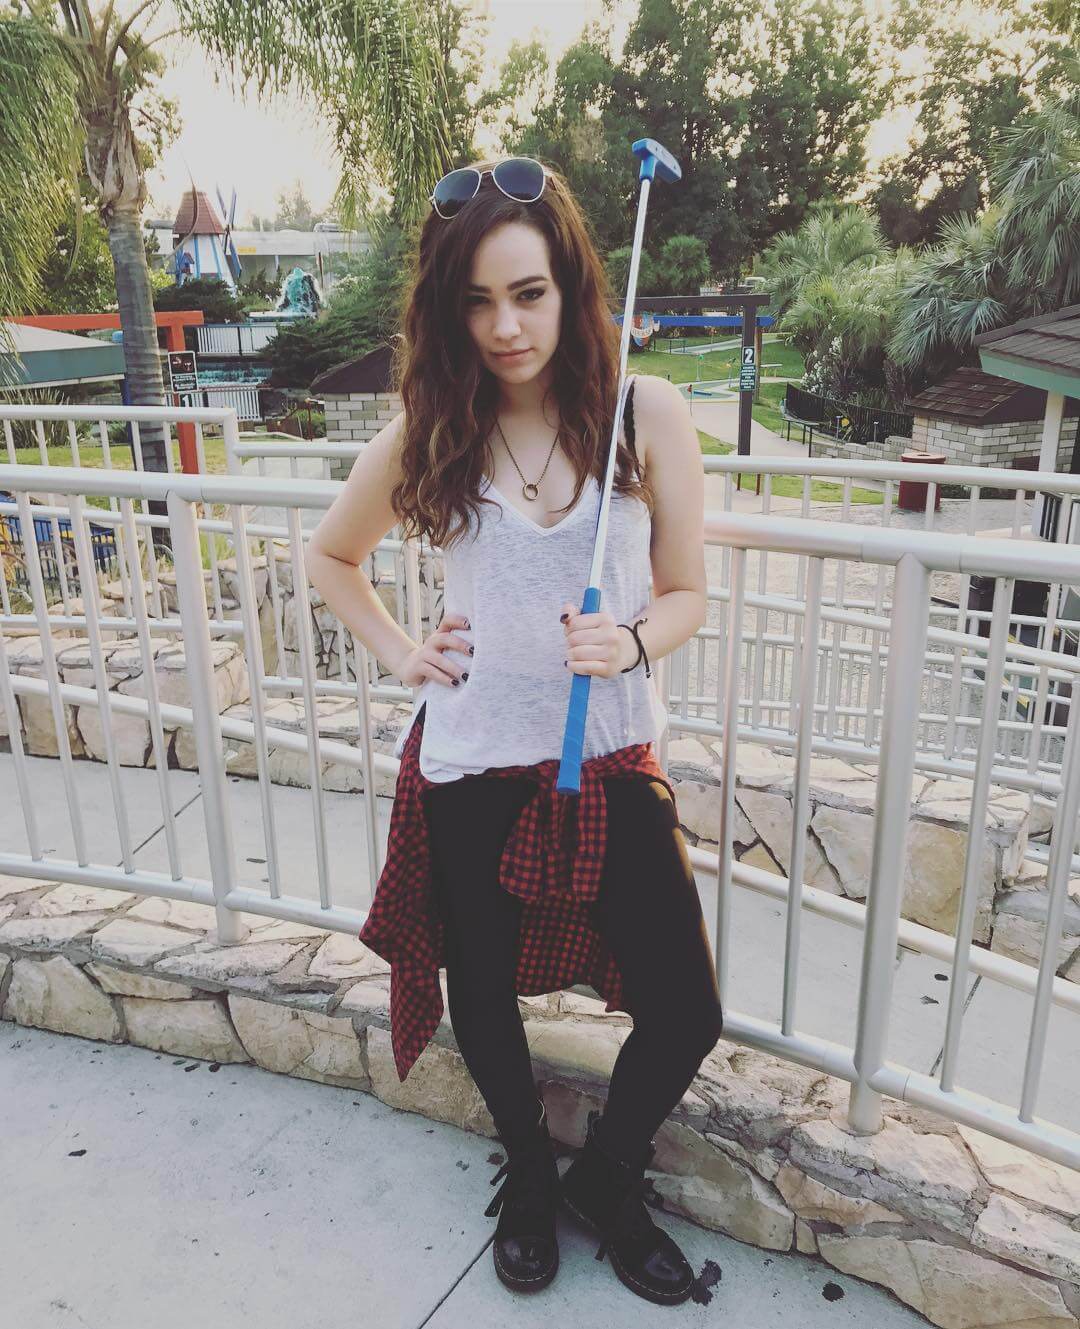 65+ Hot Pictures Of Mary Mouser Will Prove That She Is One Of The Hottest And Sexiest Women | Best Of Comic Books